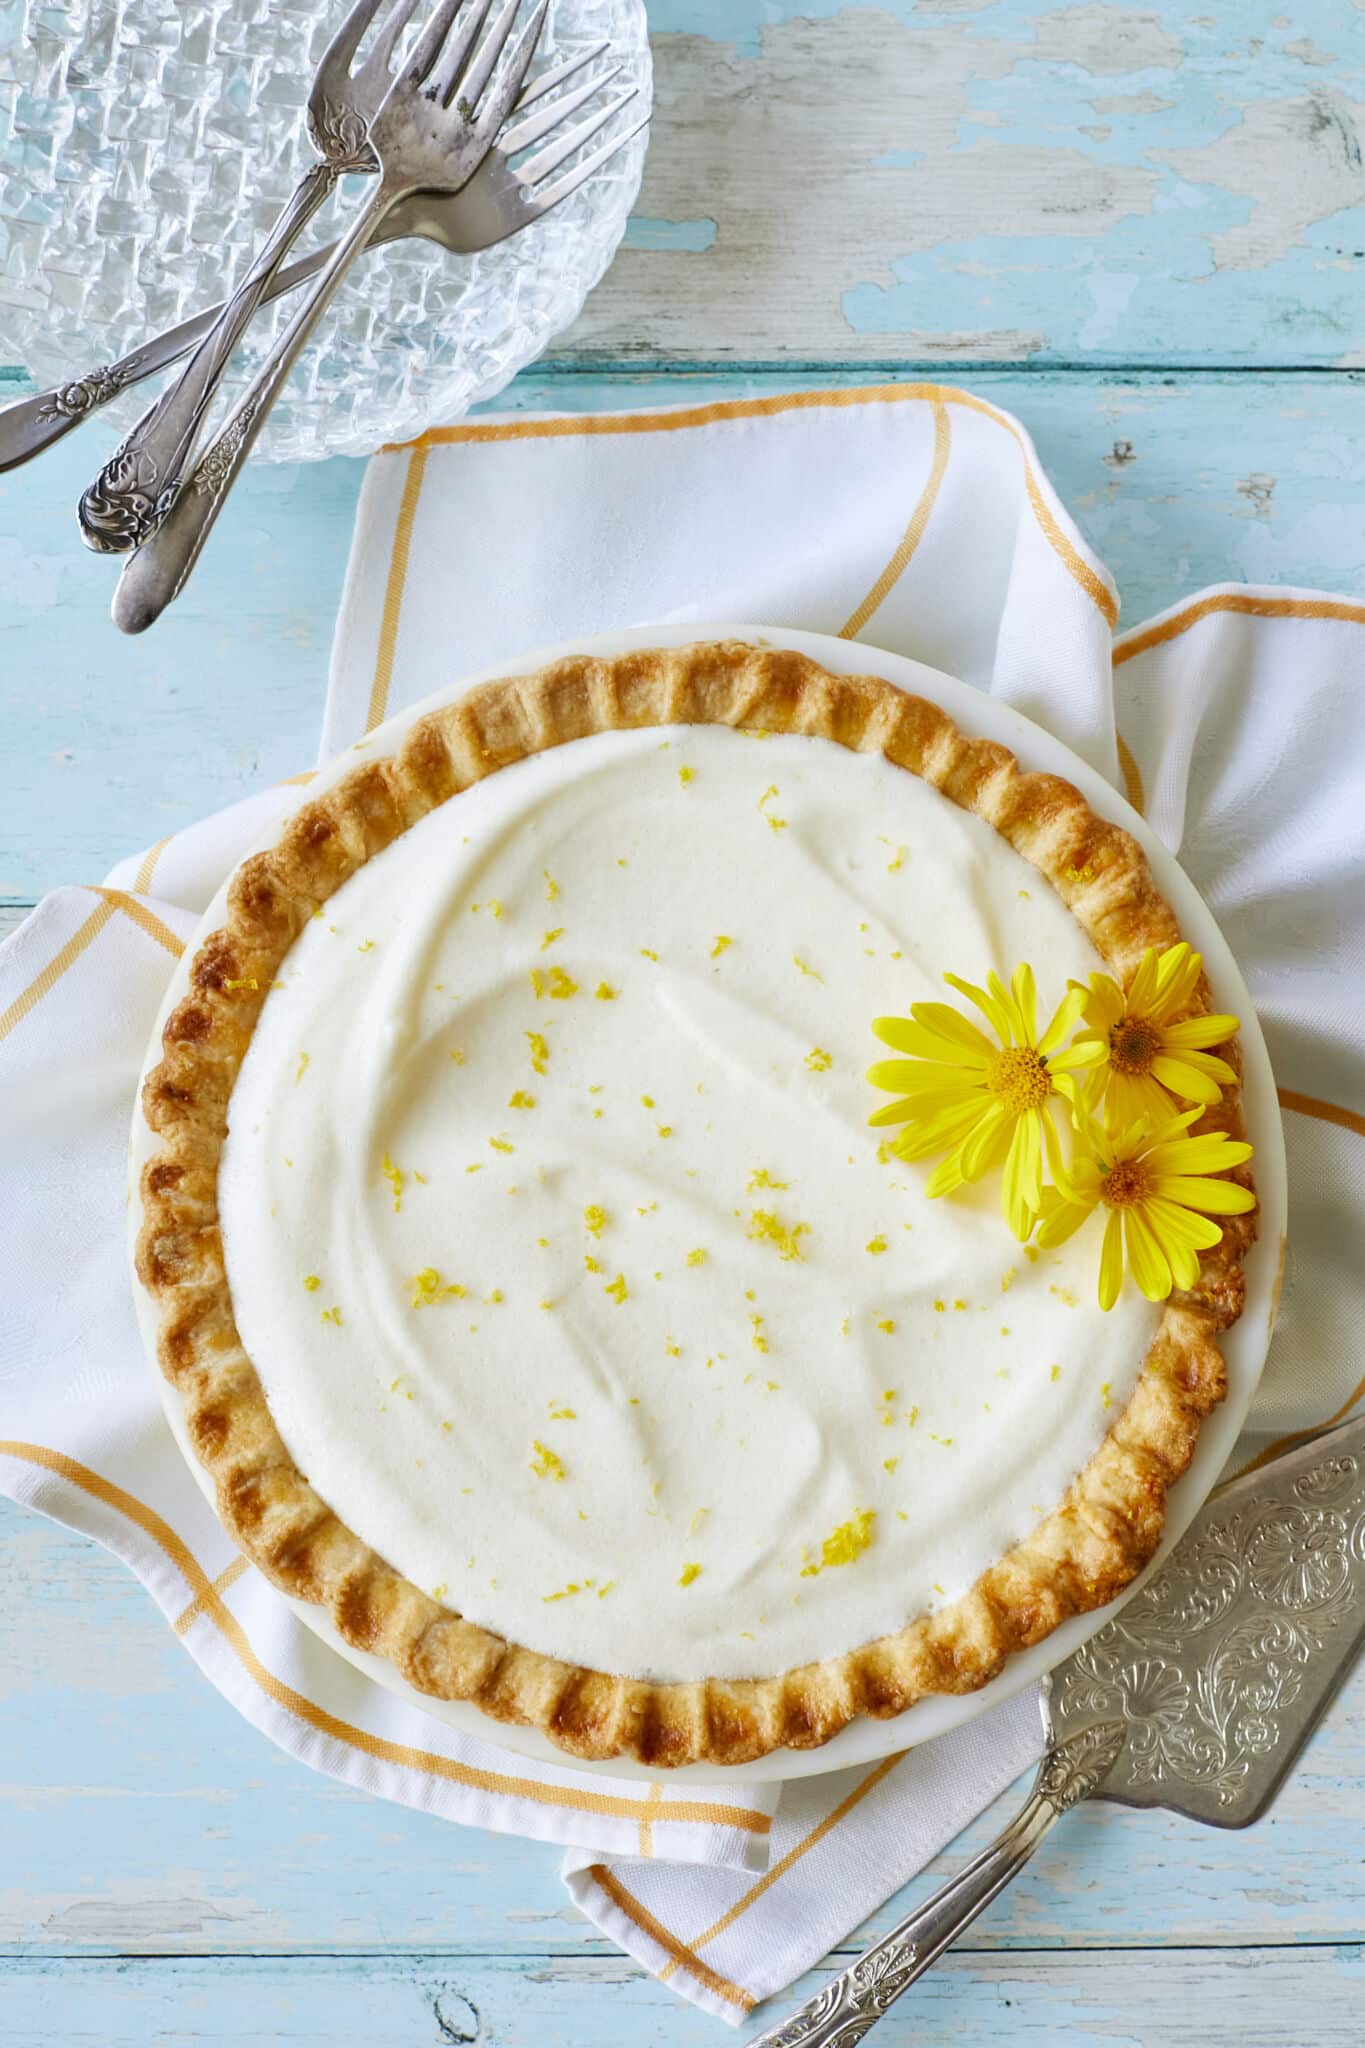 An over-head shot shows that the Luscious Creamy Lemon Chiffon Pie has a golden curst with a white, silky filling, topped with refreshing lemon zest and two flowers. 